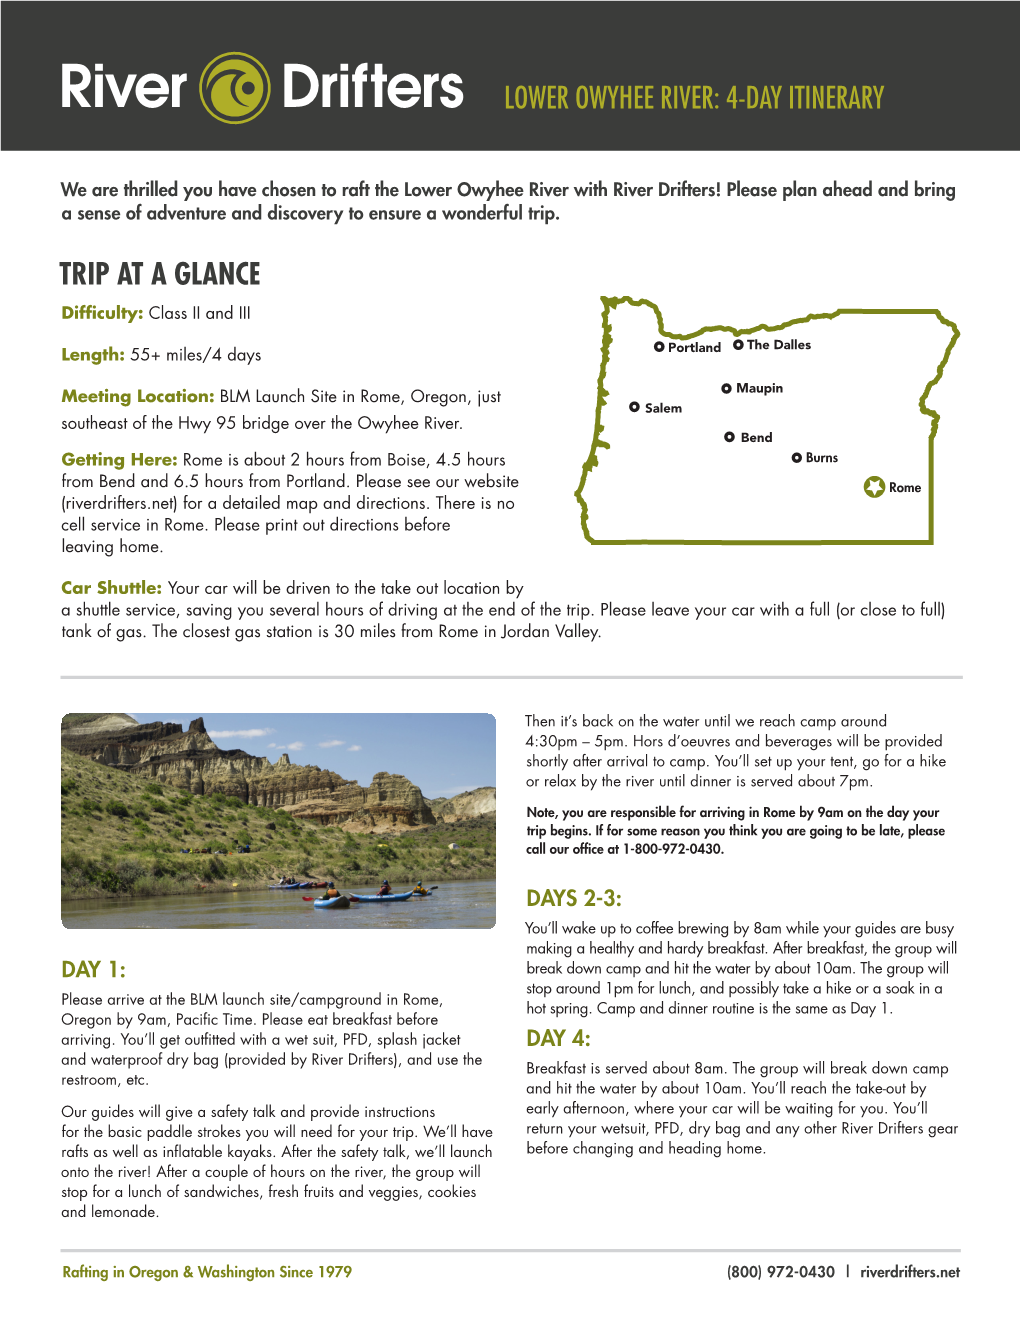 Trip at a Glance Lower Owyhee River: 4-Day Itinerary